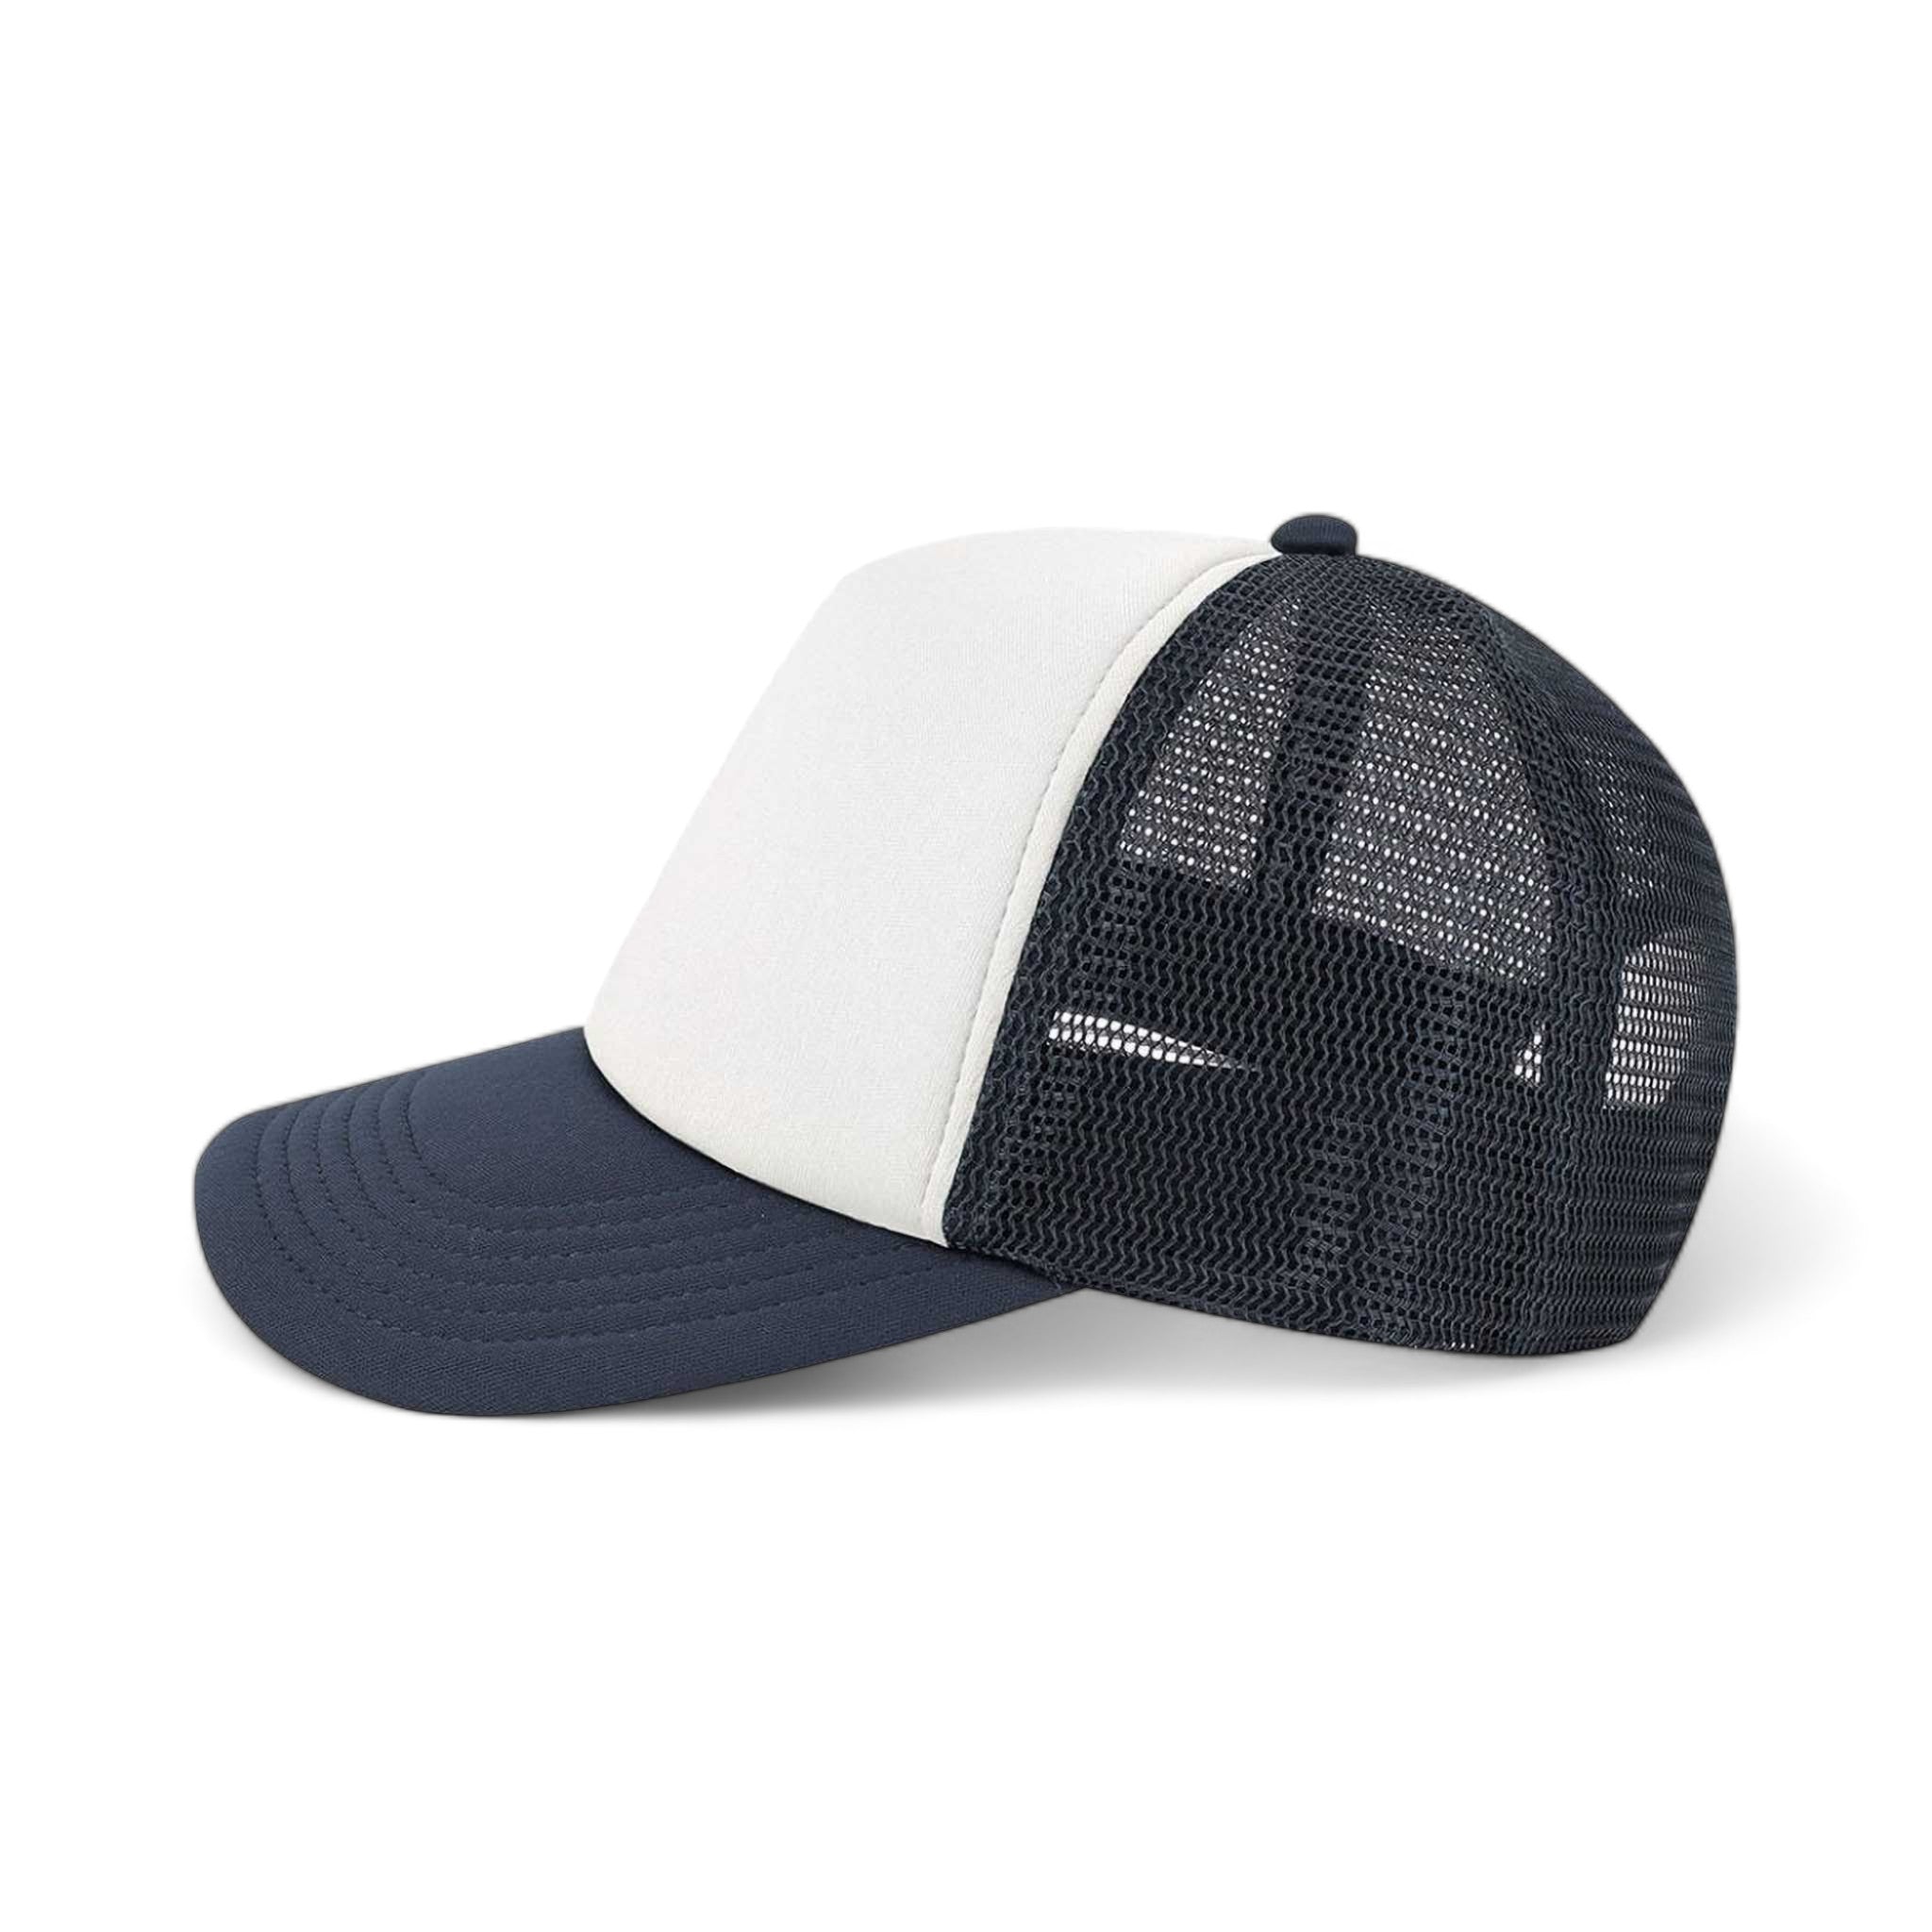 Side view of LEGACY LTA custom hat in white and navy